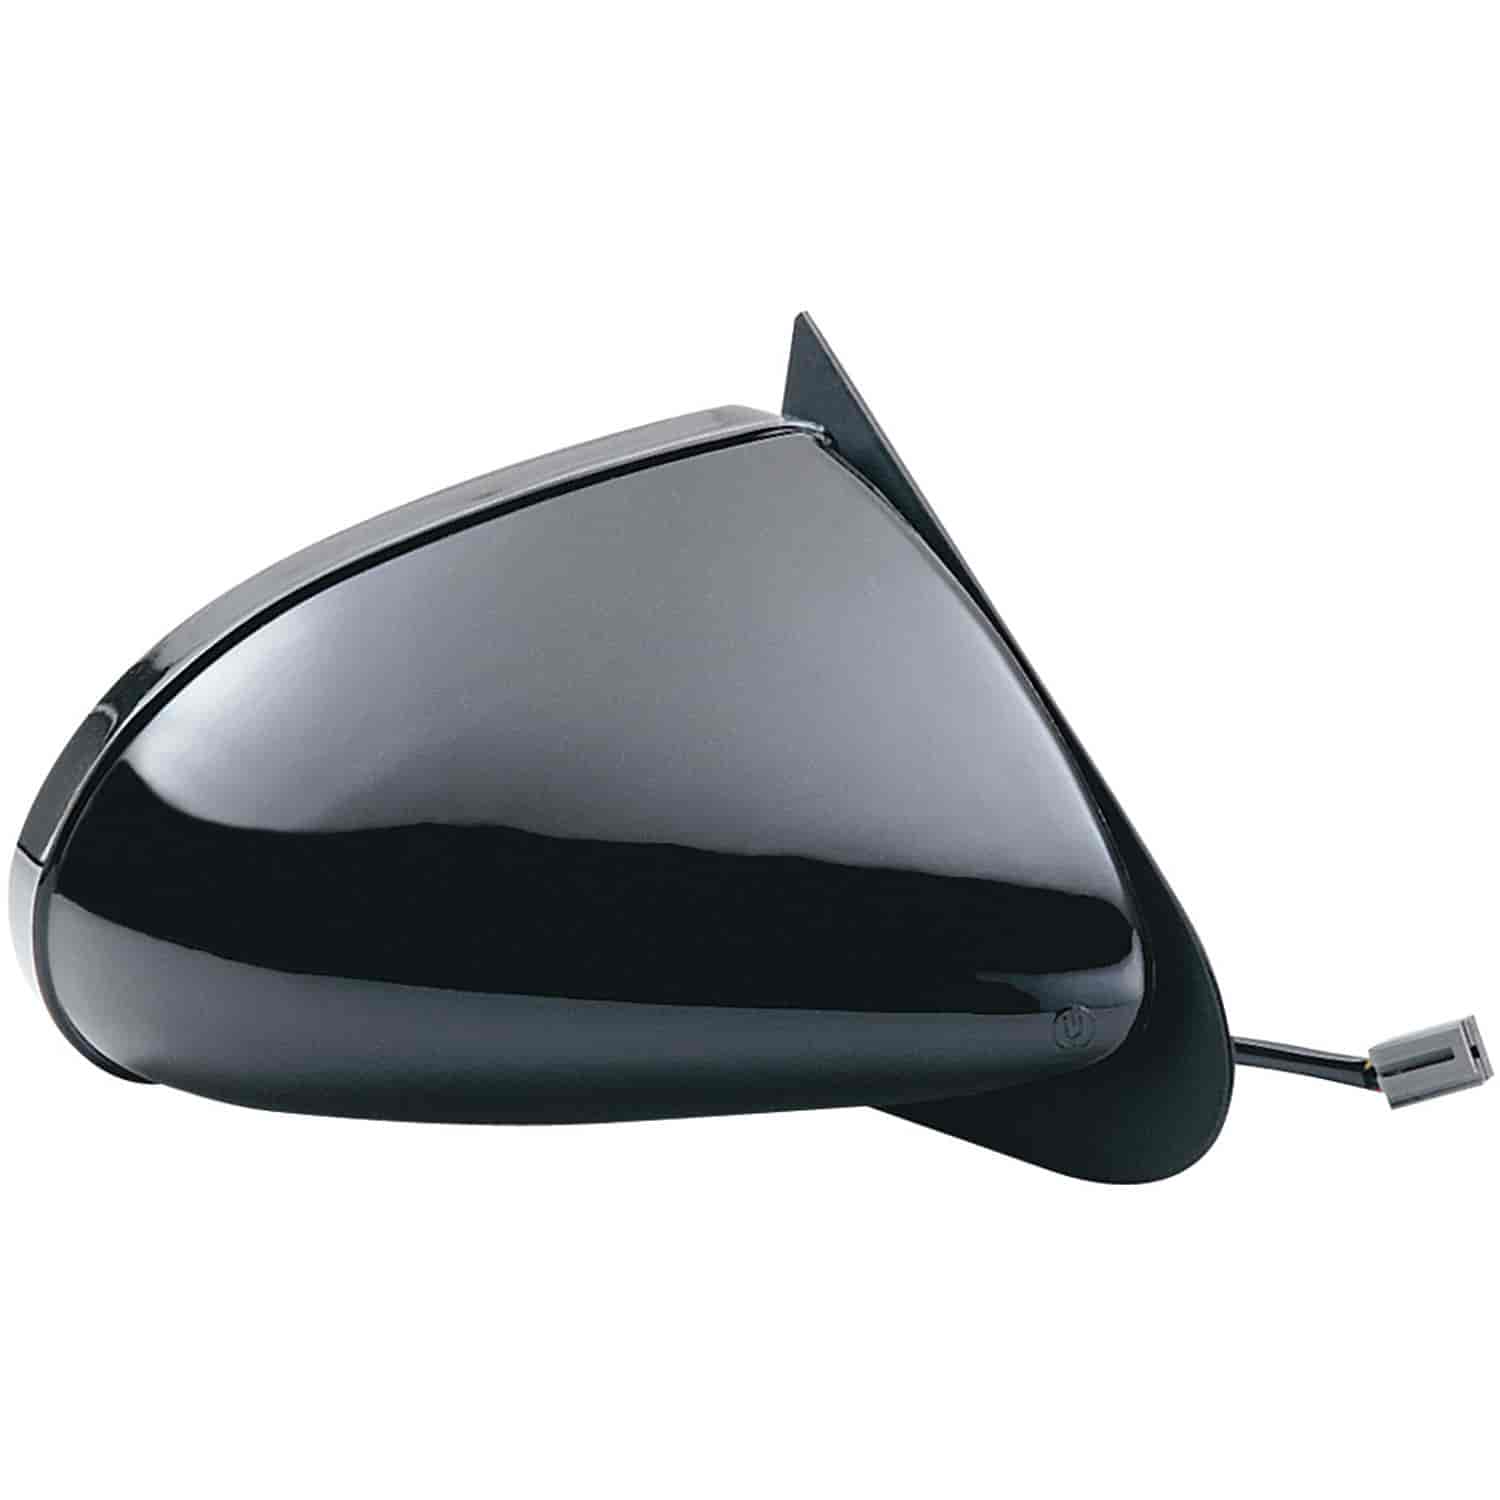 OEM Style Replacement mirror for 89-97 Ford Thunderbird Mercury Cougar XR7 passenger side mirror tes